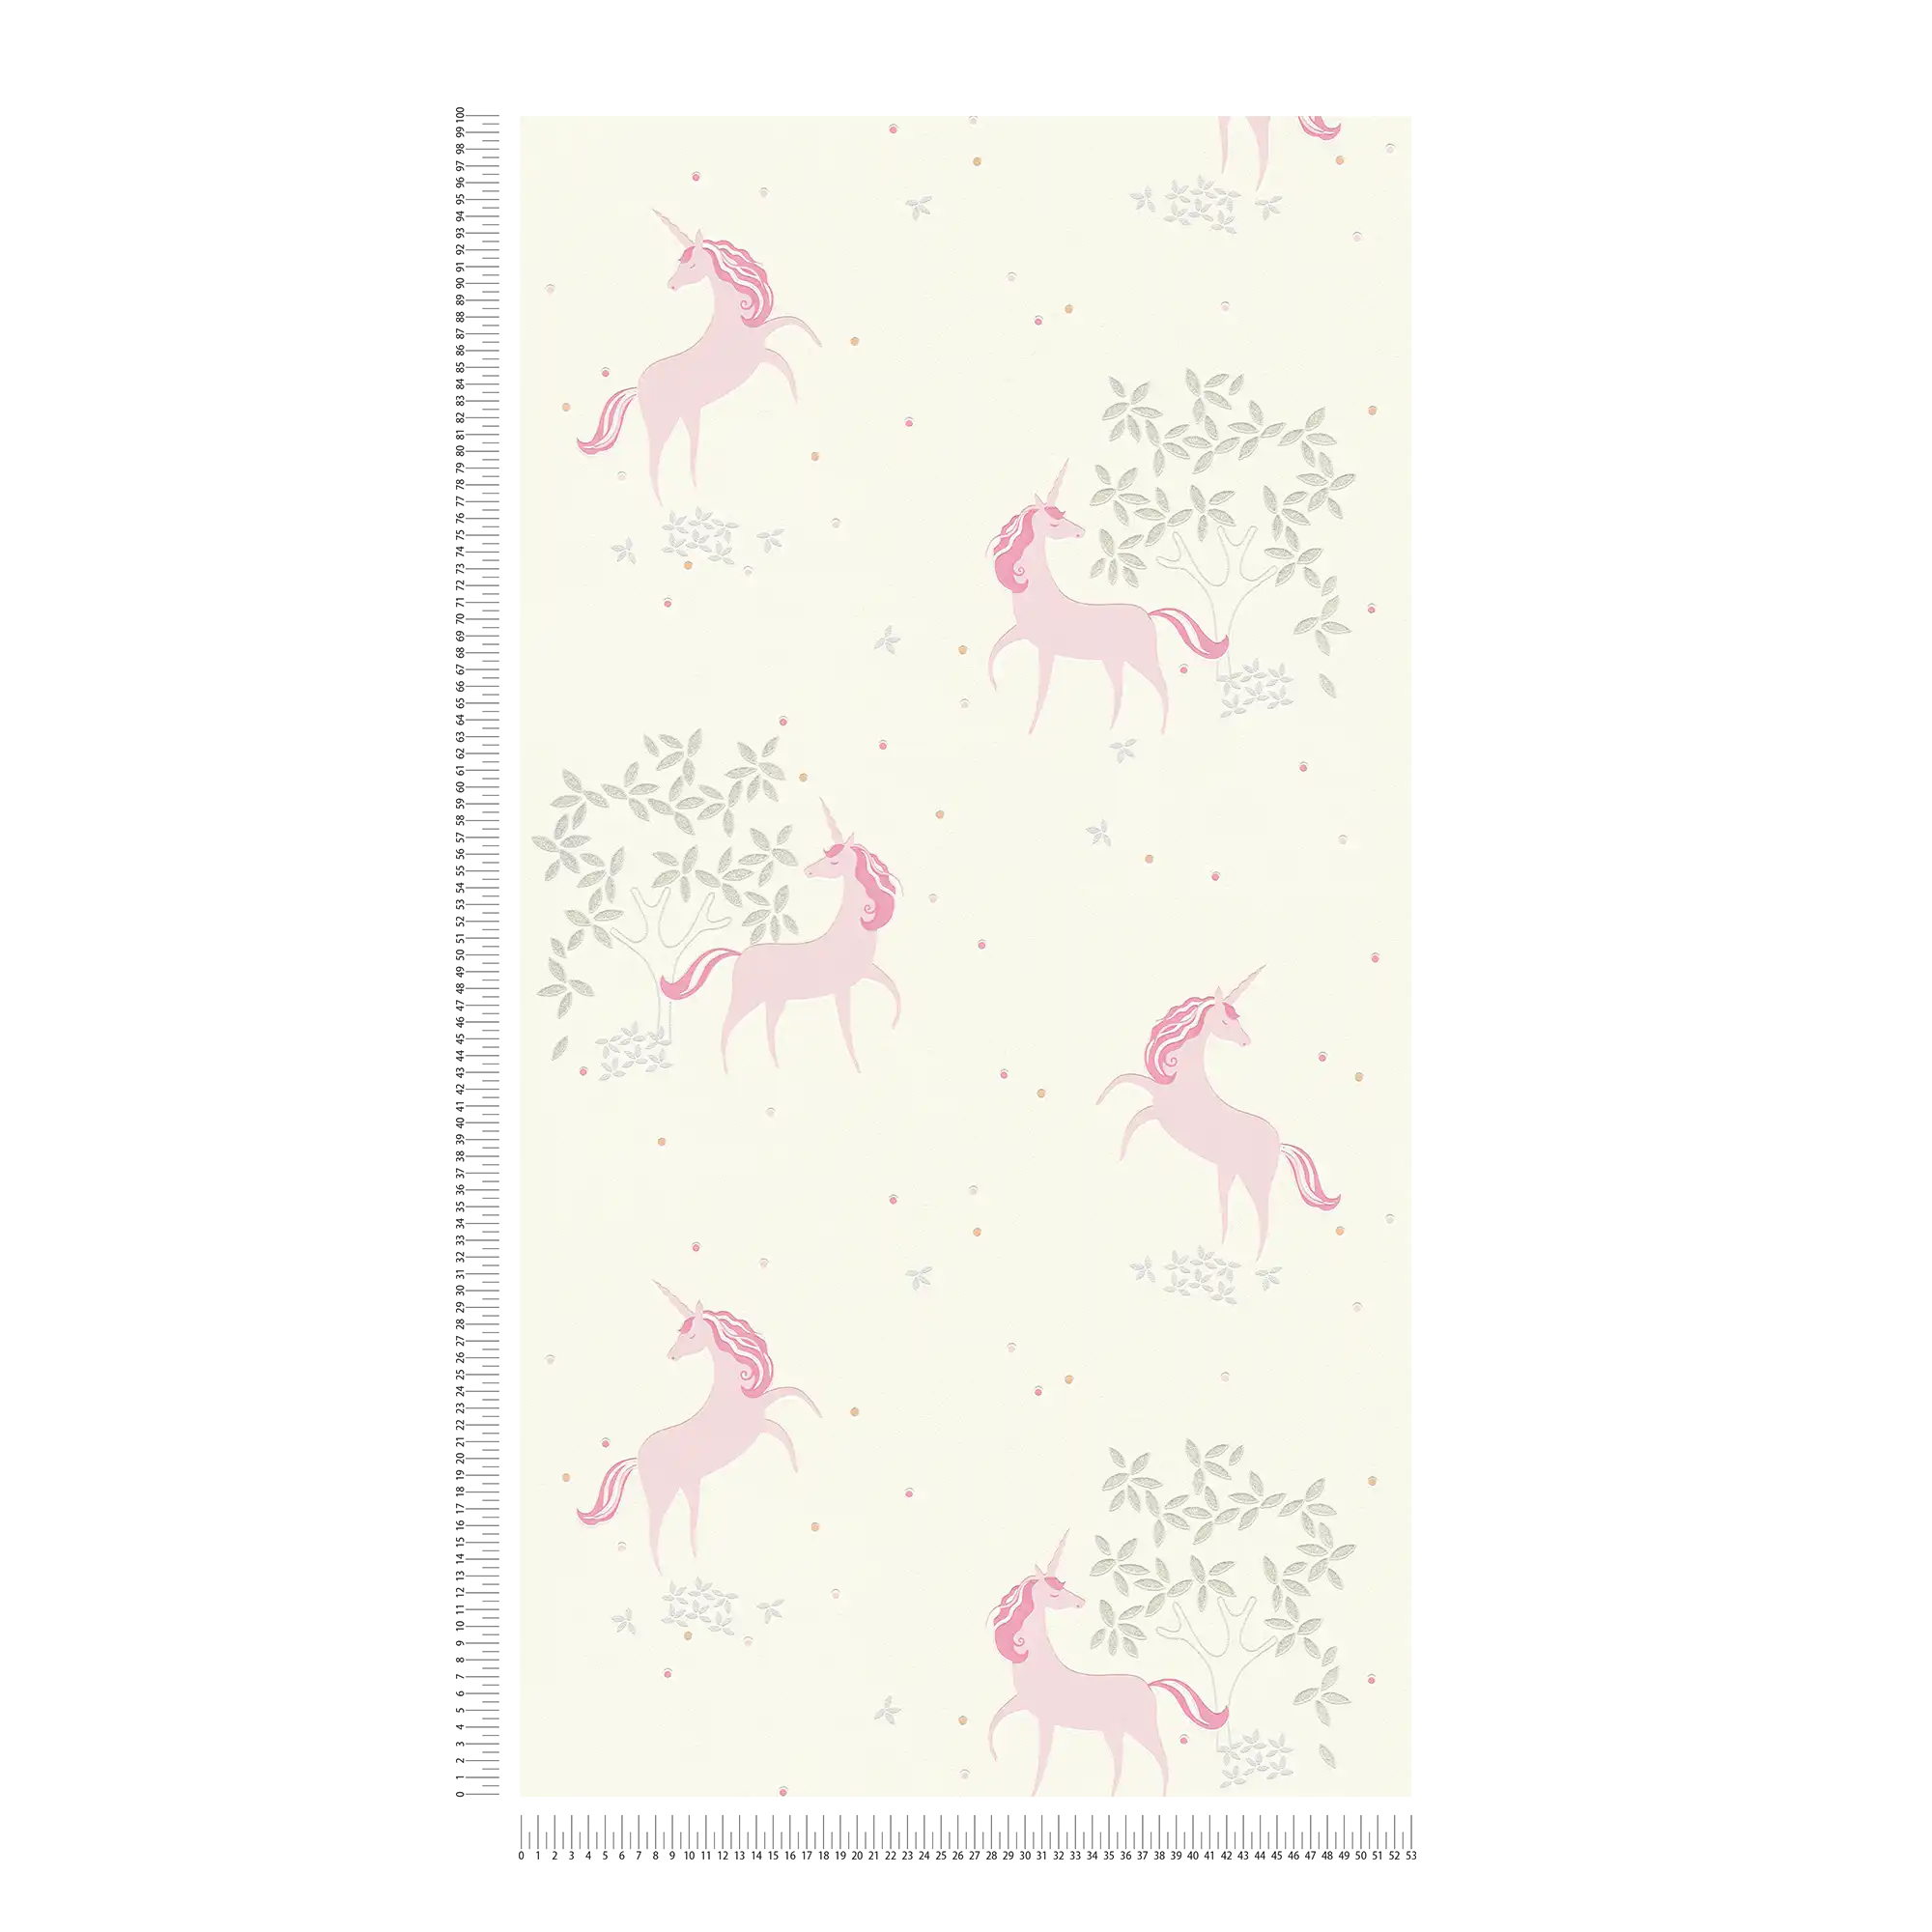             Unicorn non-woven wallpaper with dots & silver glitter - pink, grey
        